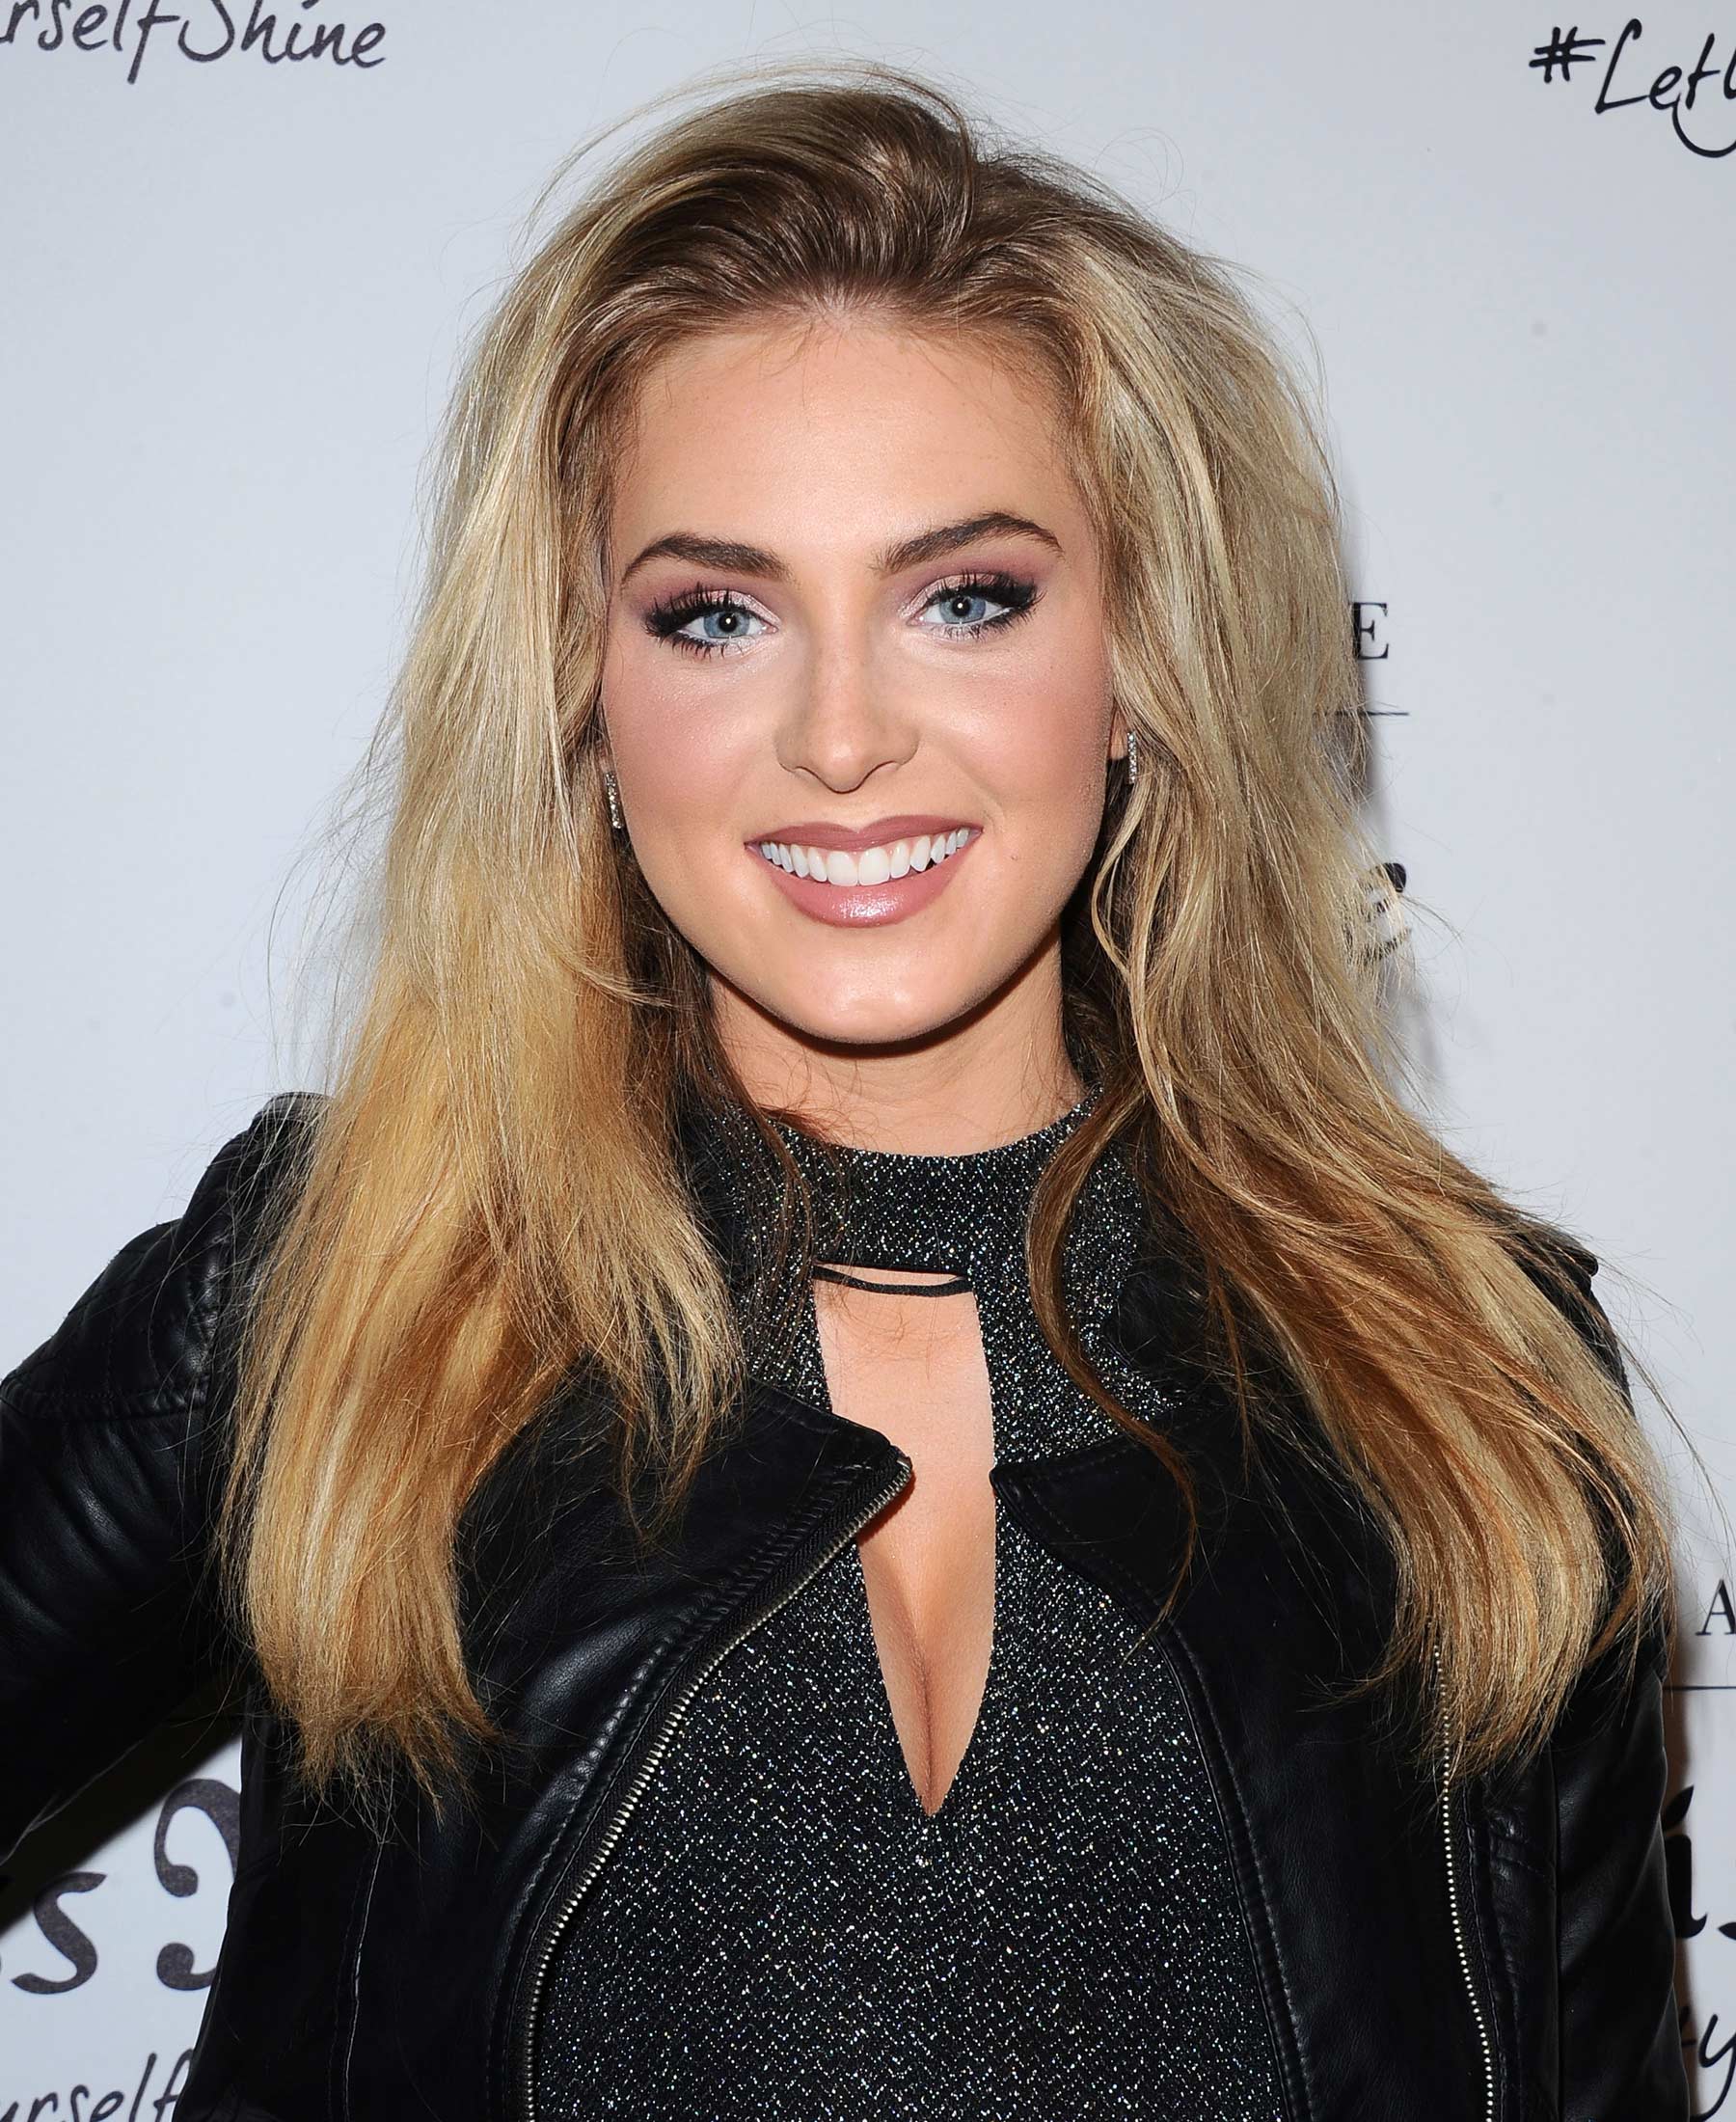 Saxon Sharbino attends Miss Me and Cosmopolitan’s Spring Campaign Launch Event